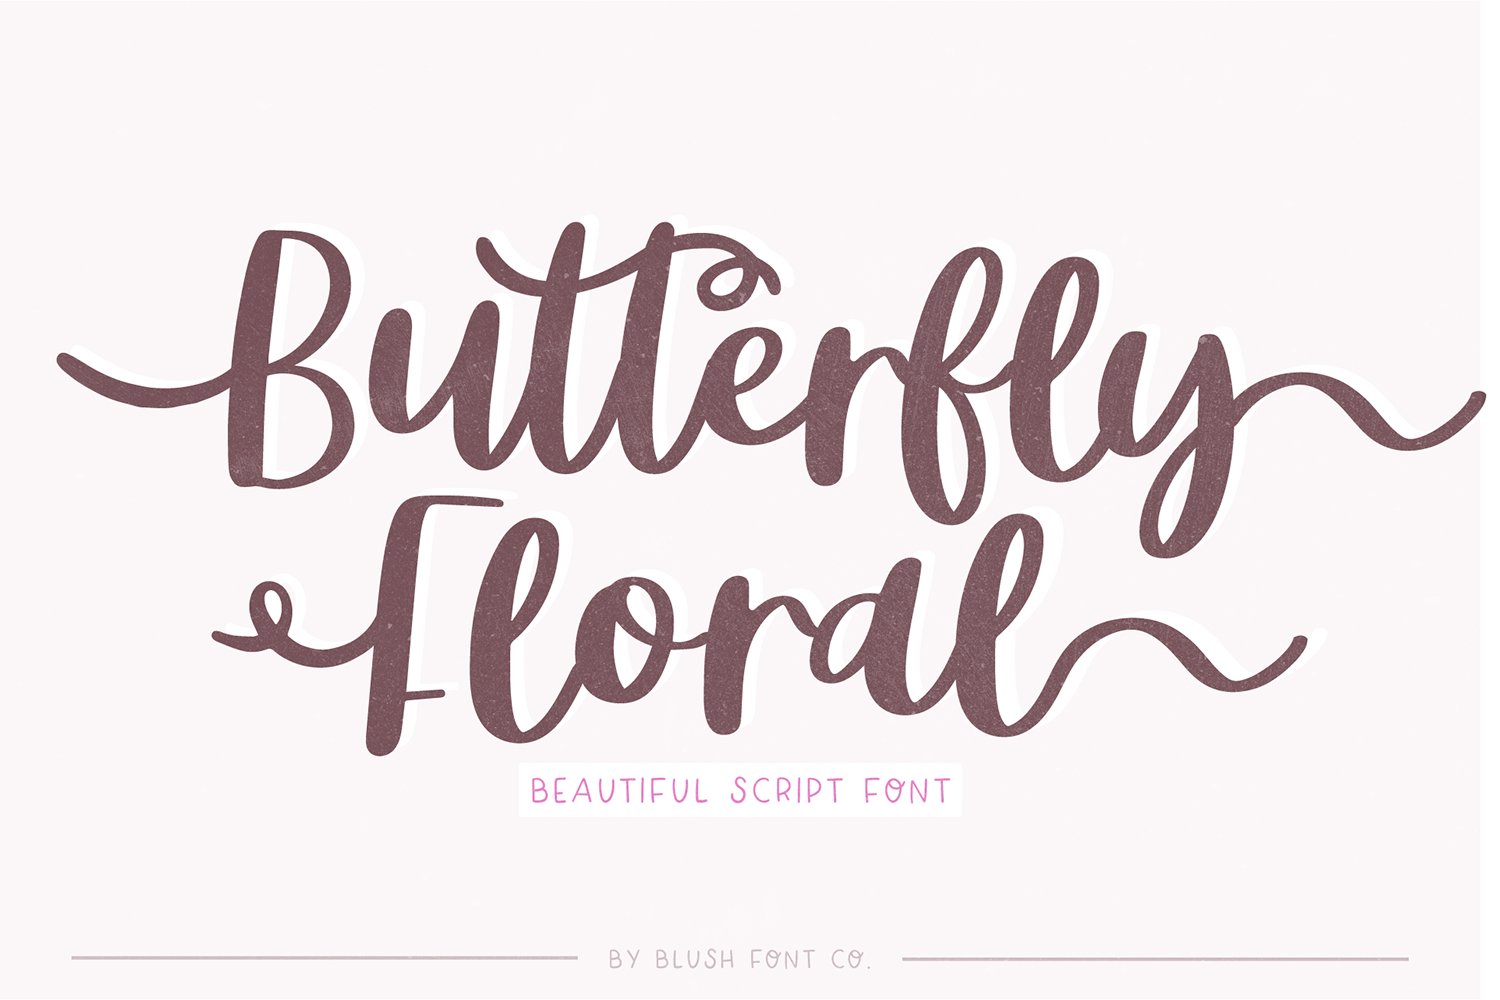 BUTTERFLY FLORAL Flourish Font cover image.